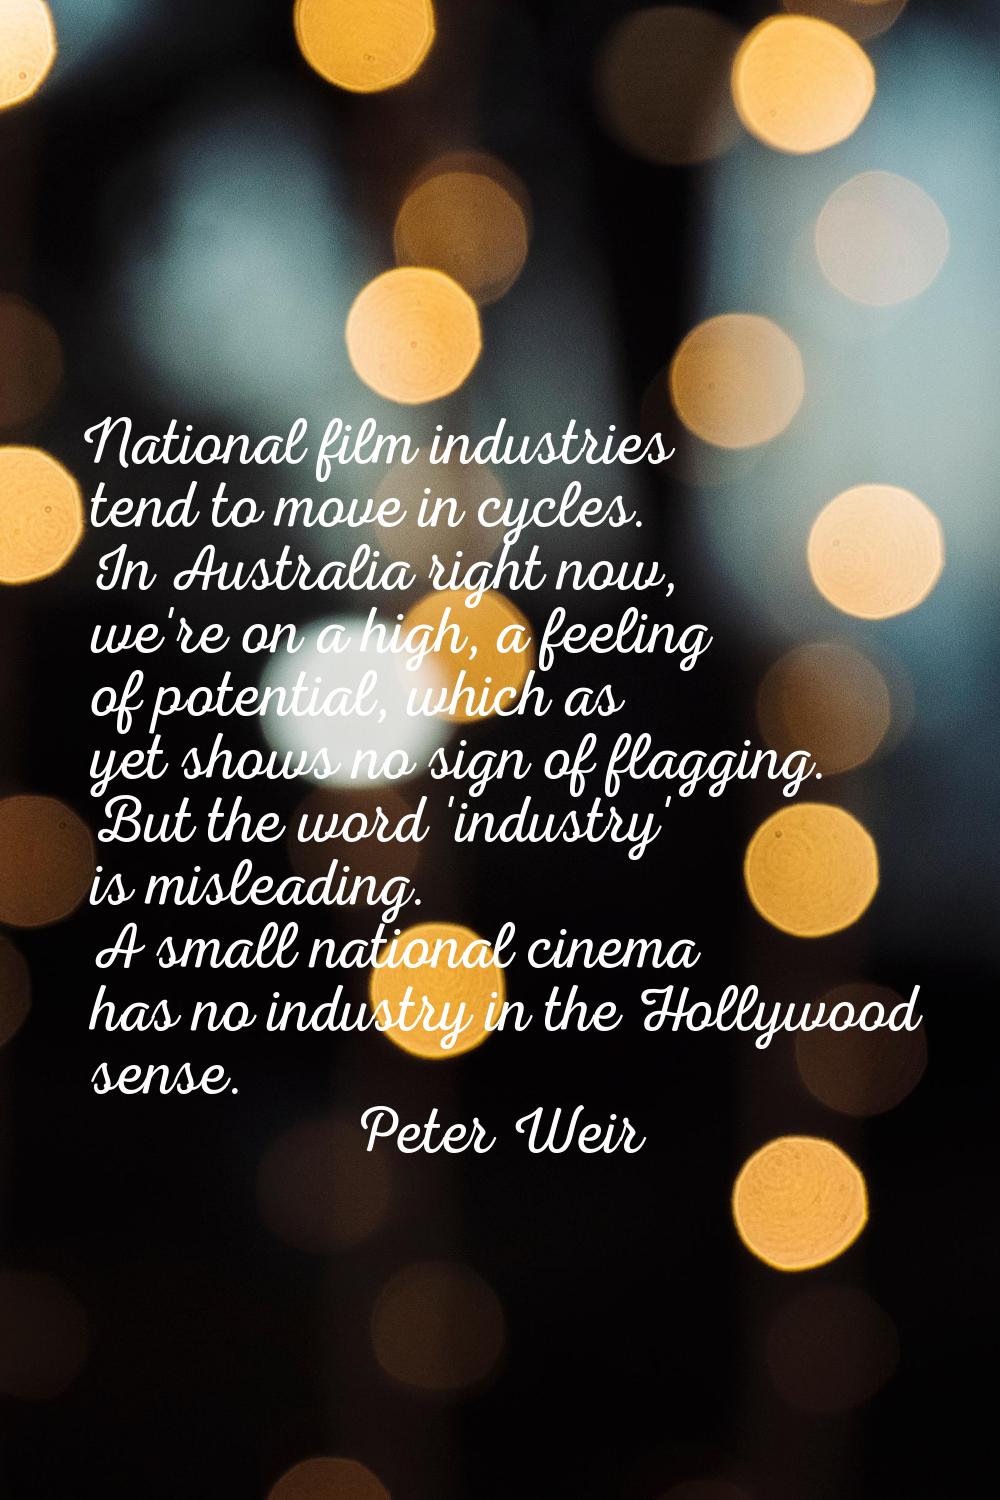 National film industries tend to move in cycles. In Australia right now, we're on a high, a feeling